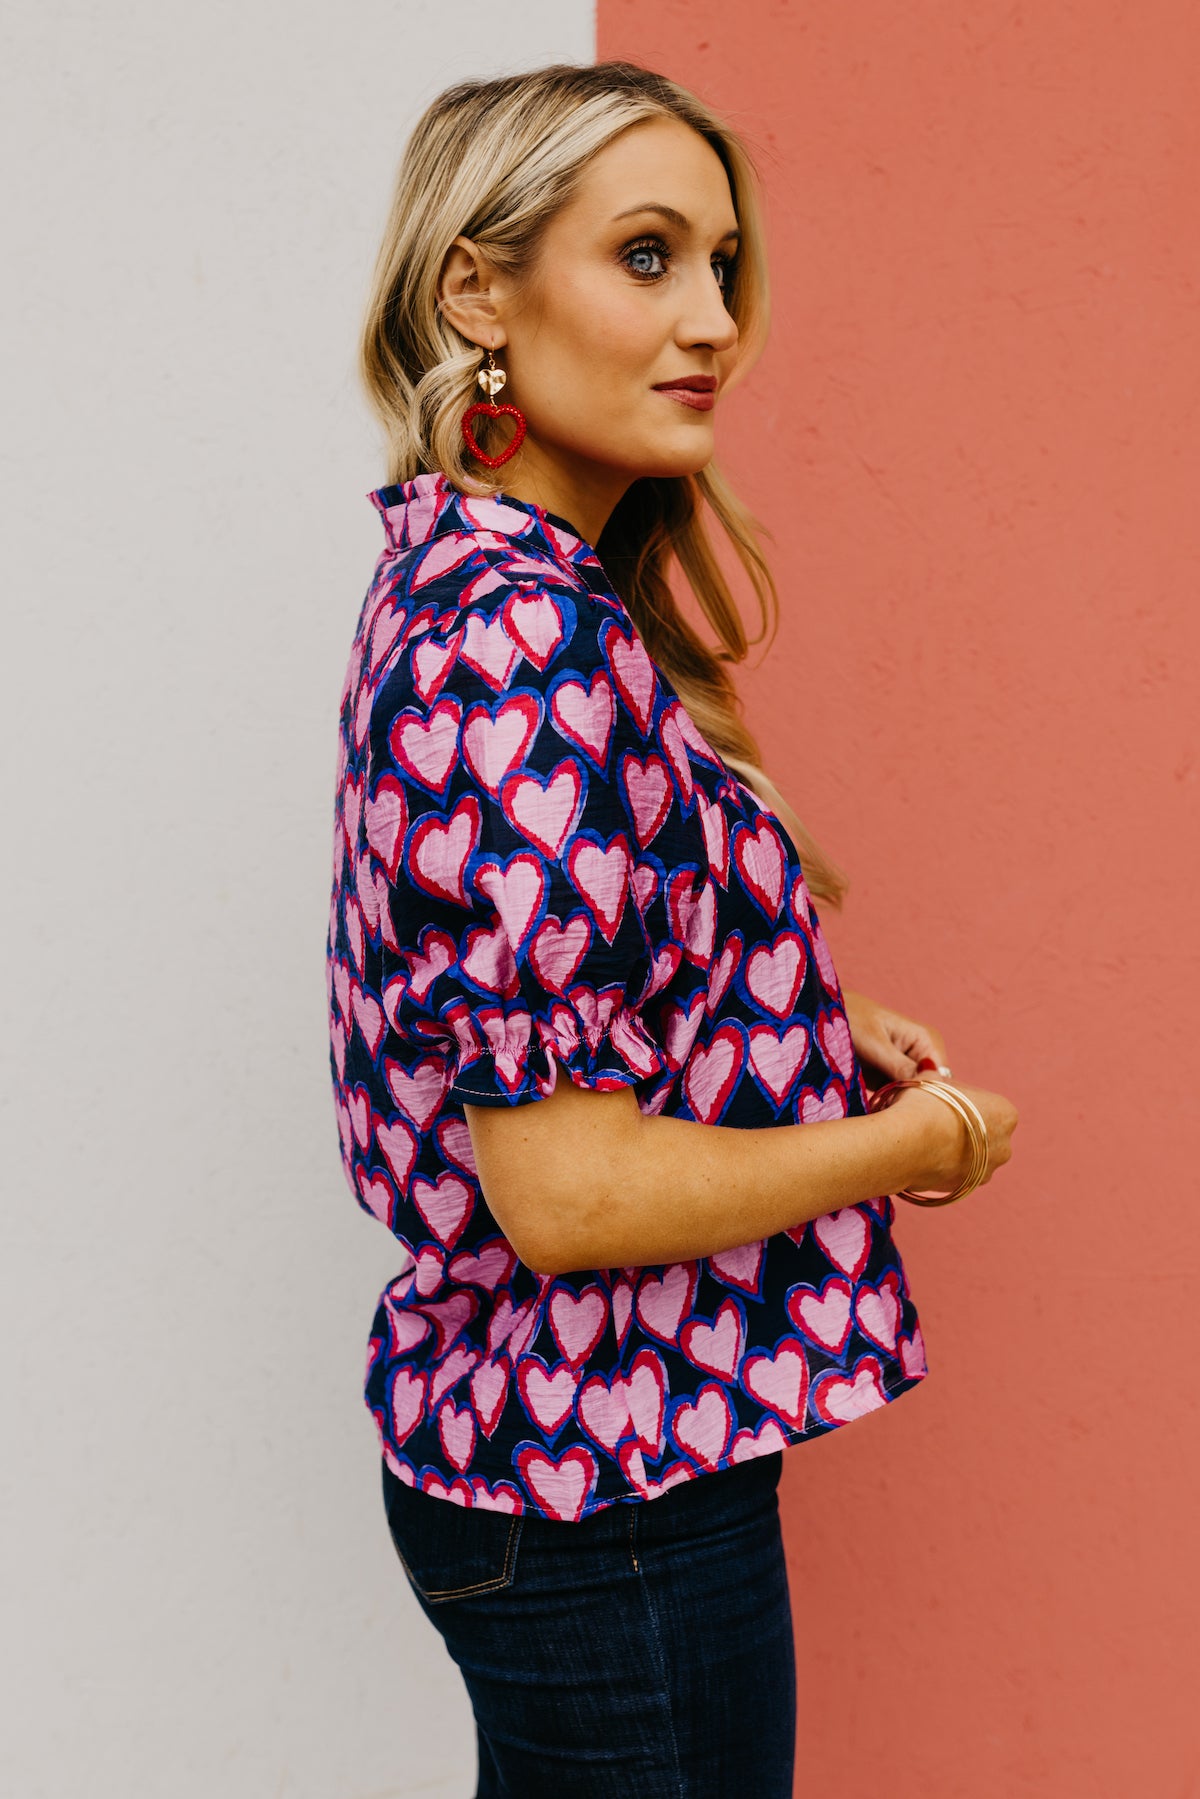 The Abraham Heart Pattern Top